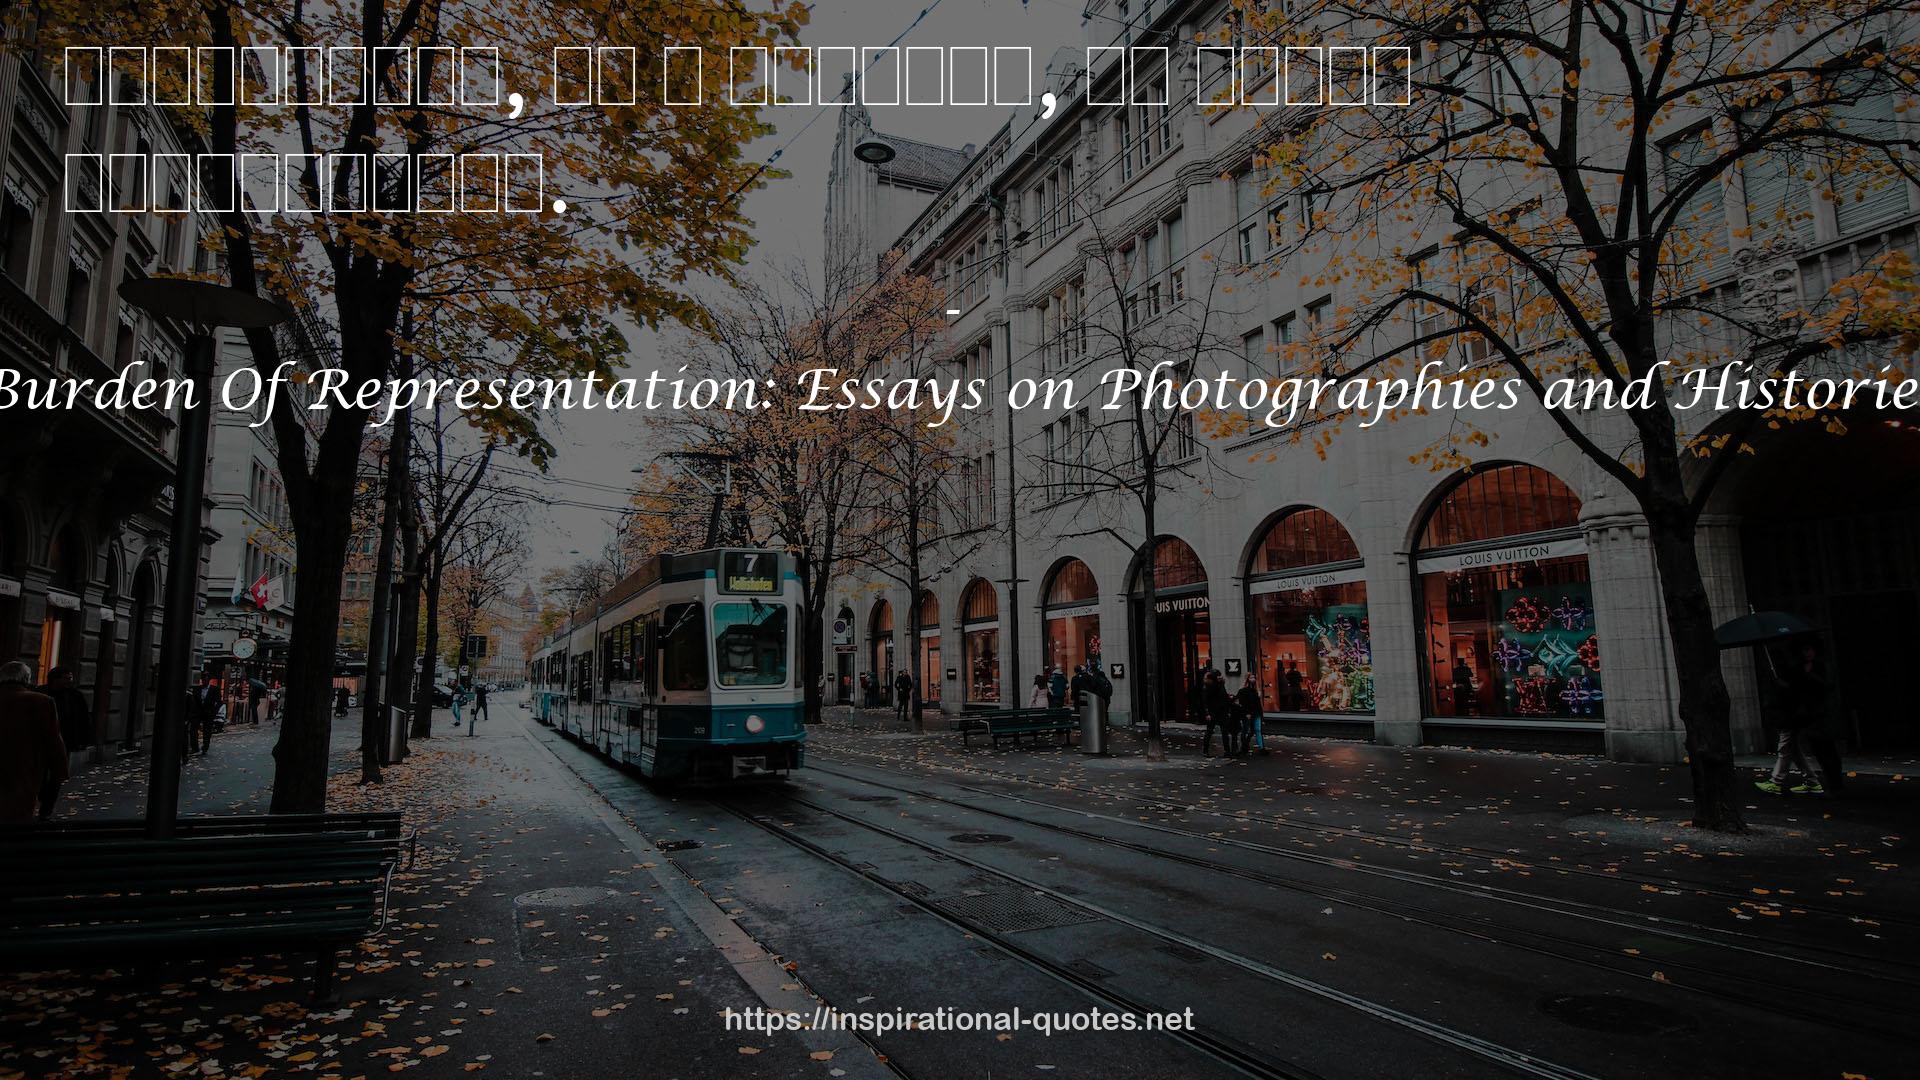 Burden Of Representation: Essays on Photographies and Histories QUOTES